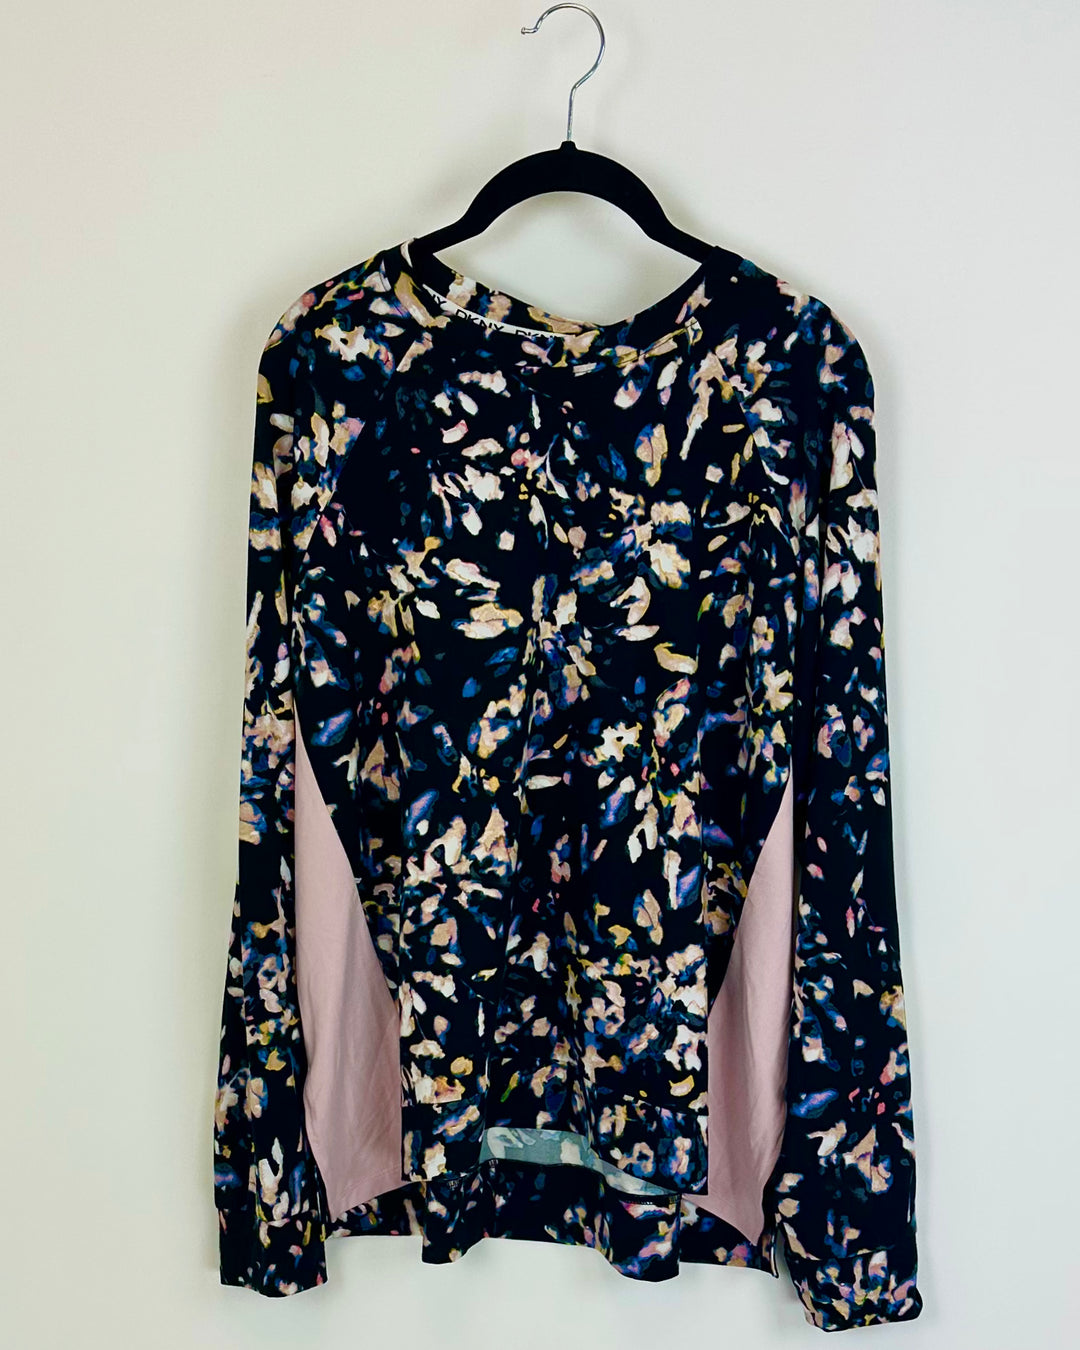 Long Sleeve Floral Nightshirt - Small